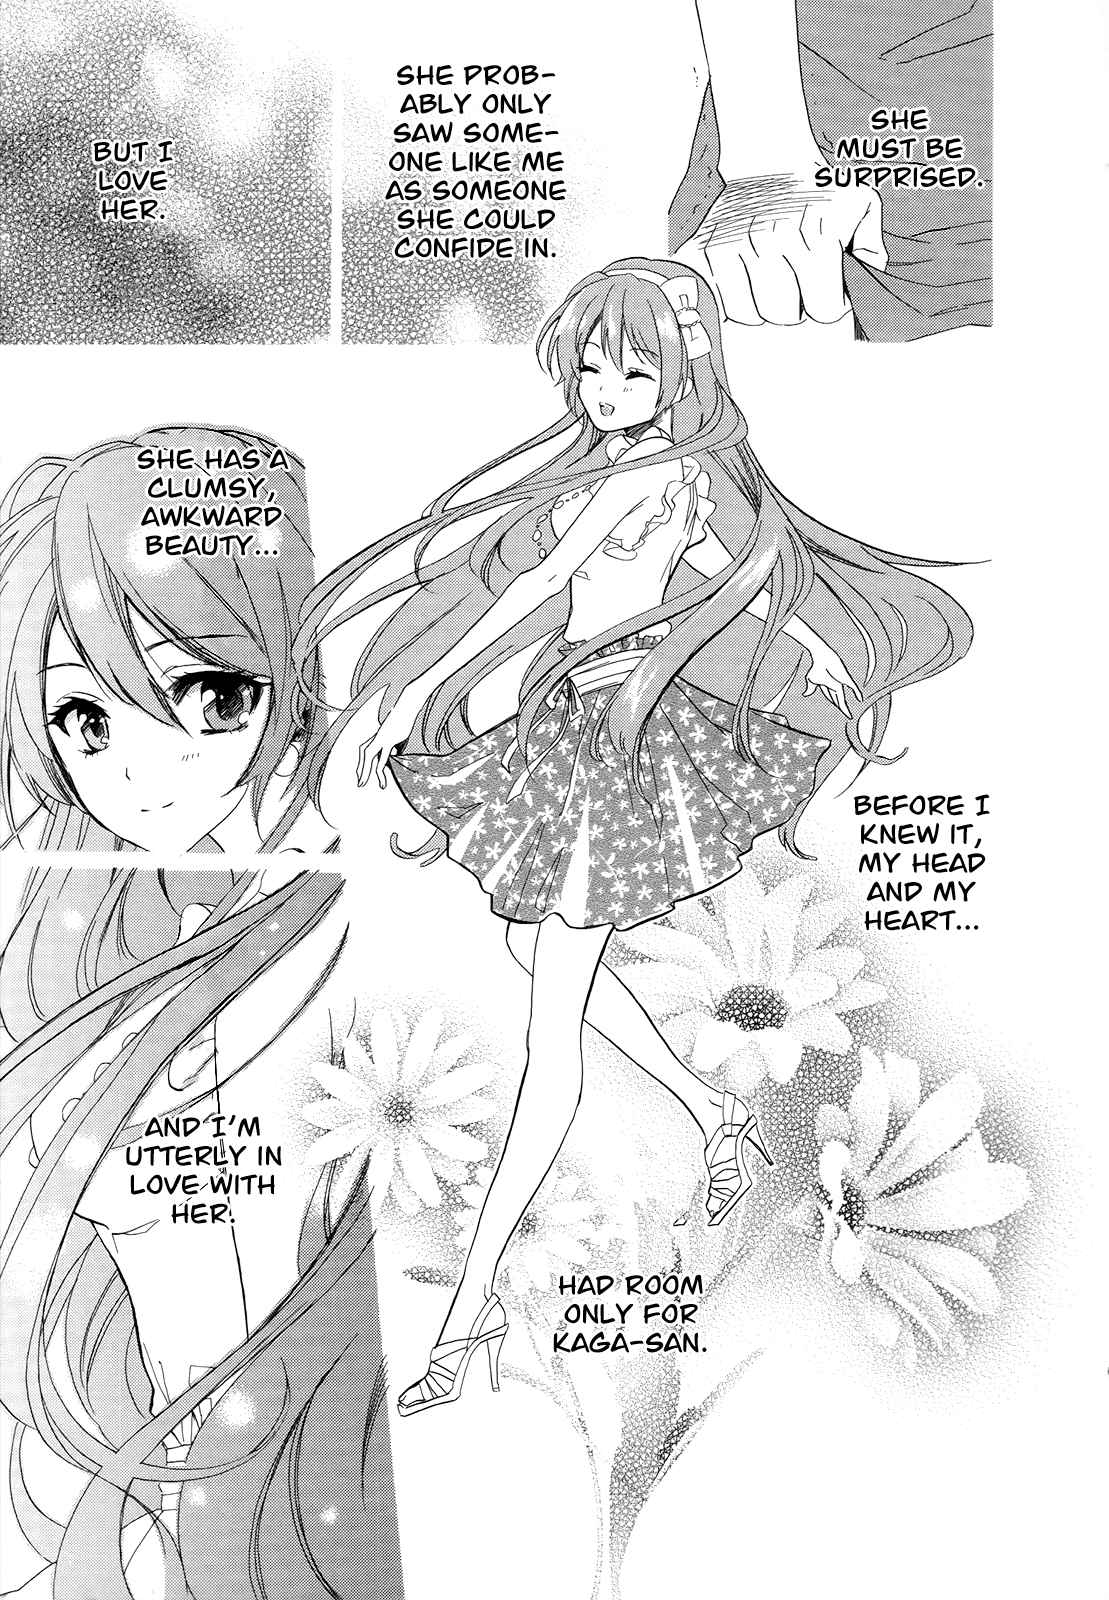 Golden Time Vol. 2 Ch. 11 A Clumsy, Awkward Beauty